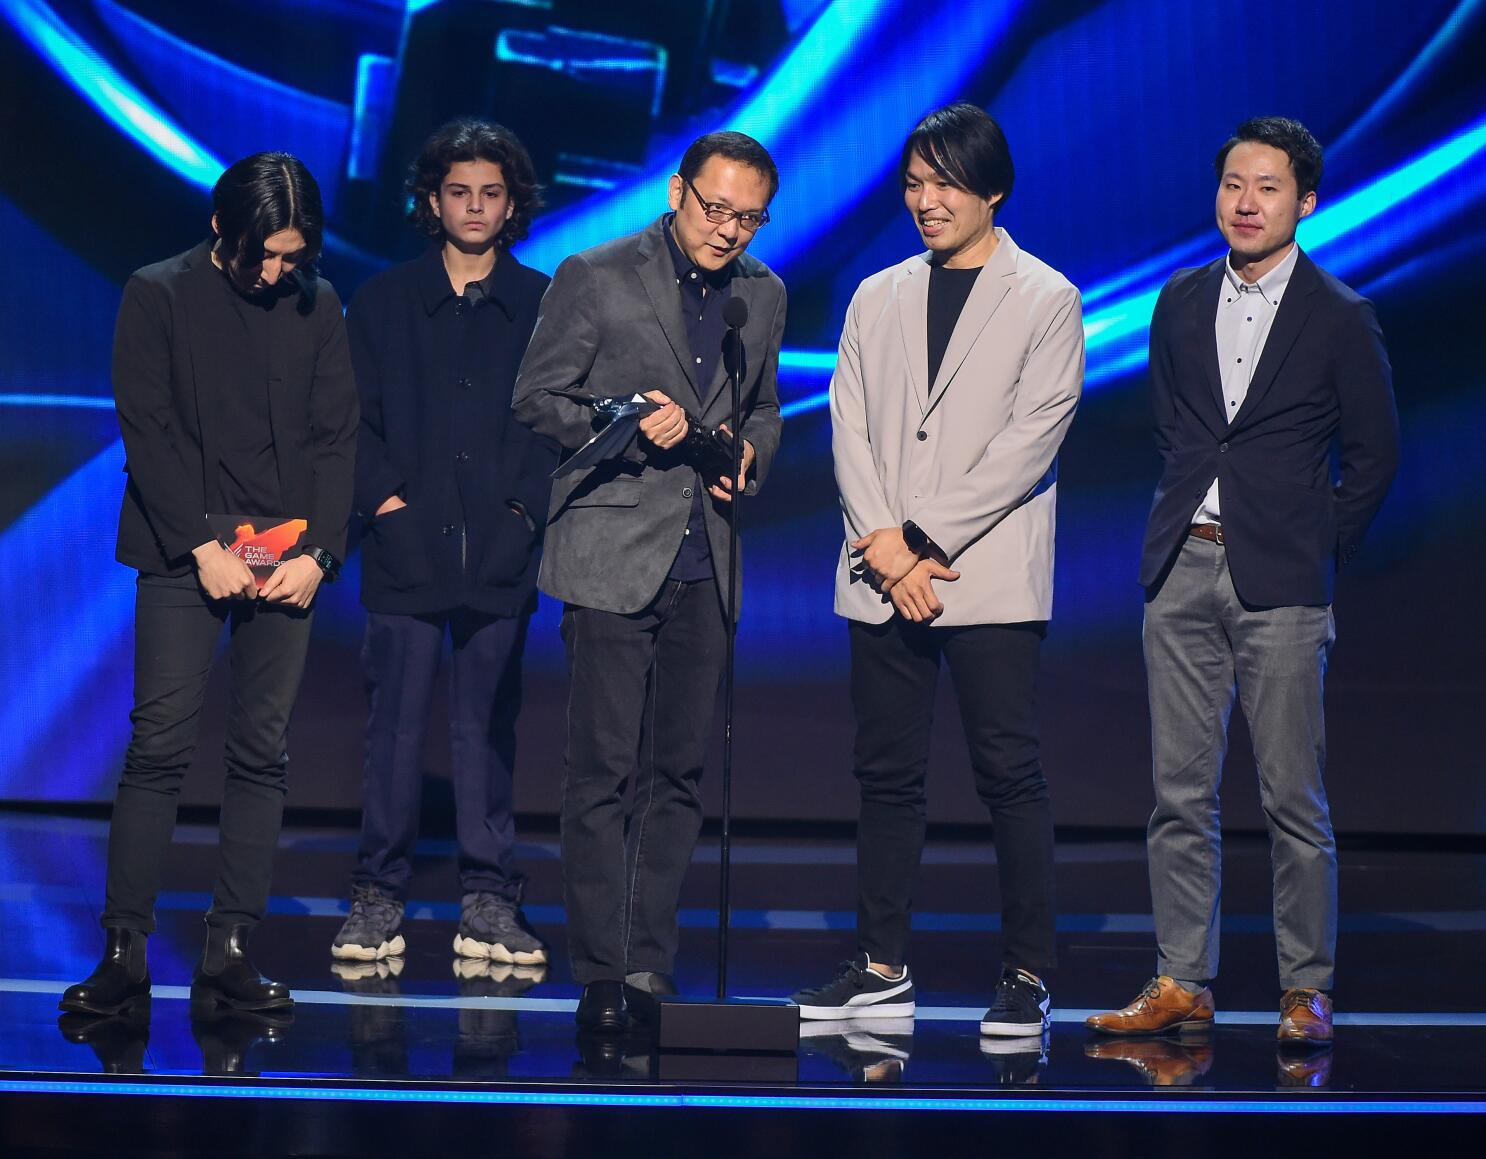 The Game Awards 2022: Esports category winners